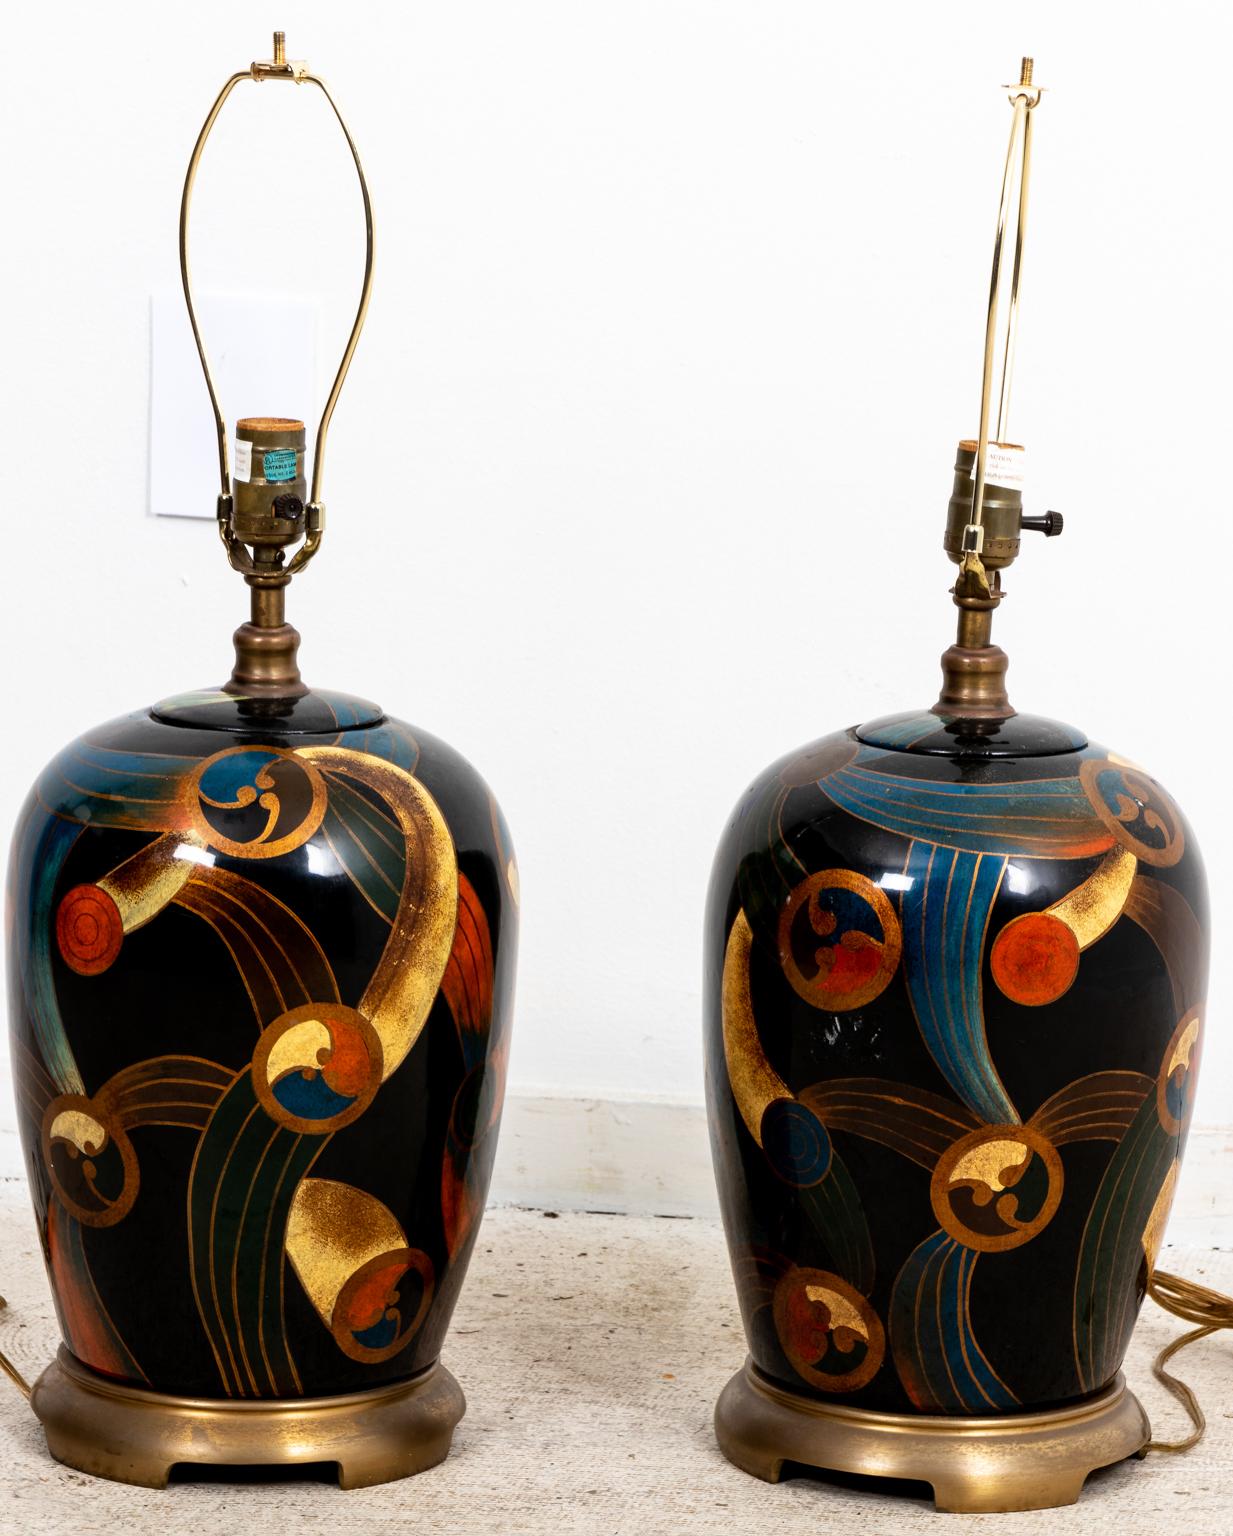 Pair of Art Deco style glass table lamps with stylized geometric shapes and Chinese style fretwork finial. Please note of wear consistent with age including chips, paint loss, and finish loss.